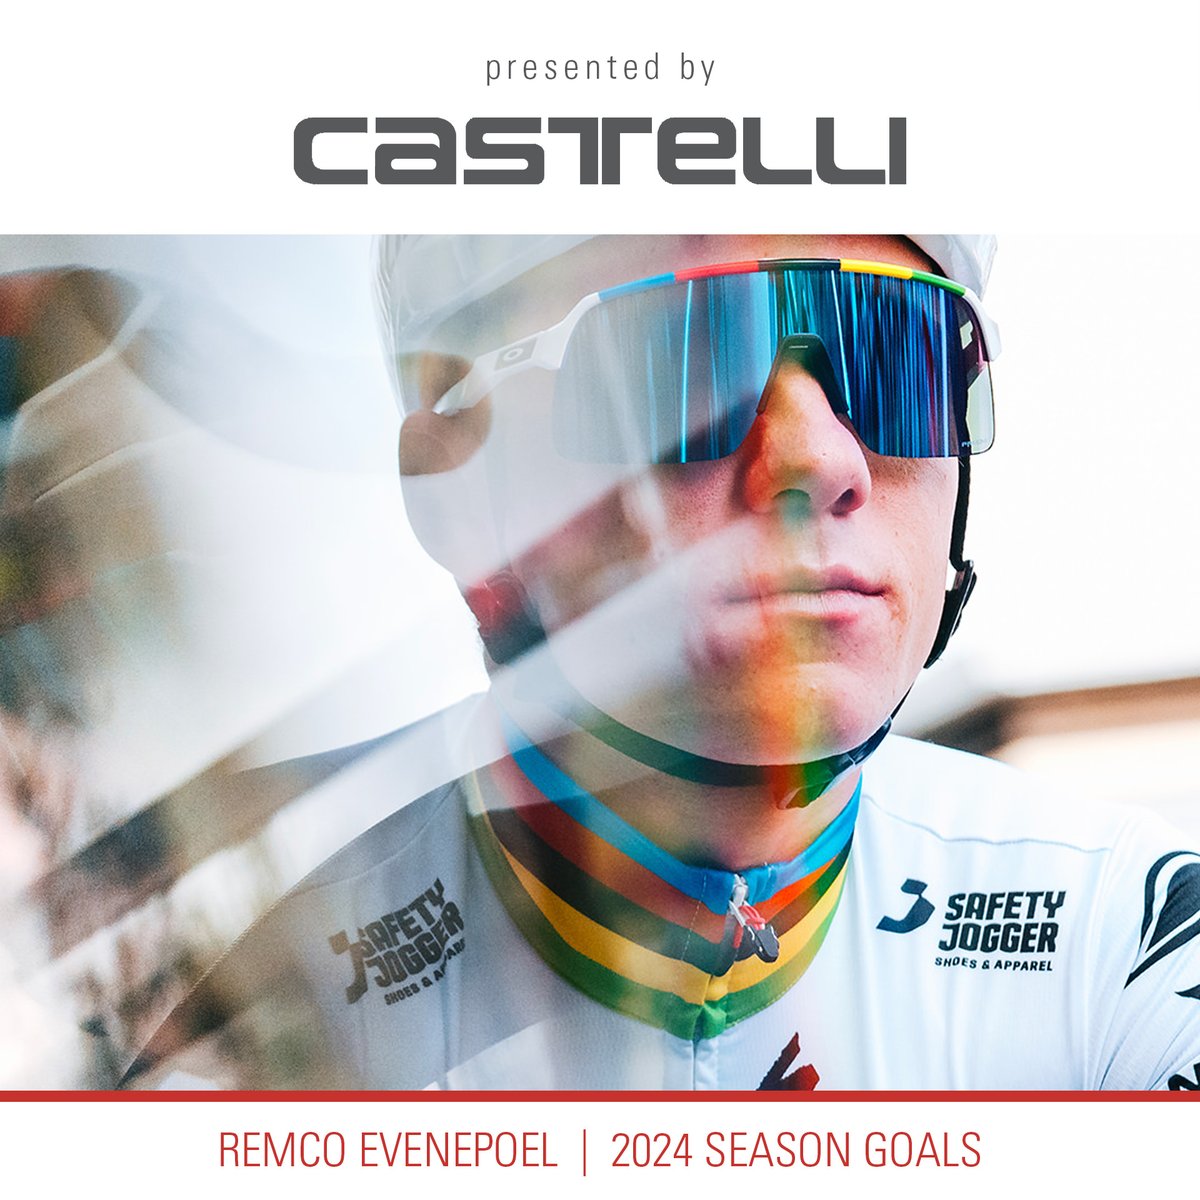 CASTELLI PODCAST 🎙️ Tour de France, Olympics, aspirations to secure gold medals in both Paris and the road Worlds in Zürich 🎧 youtube.com/watch?v=ZOE3s5…